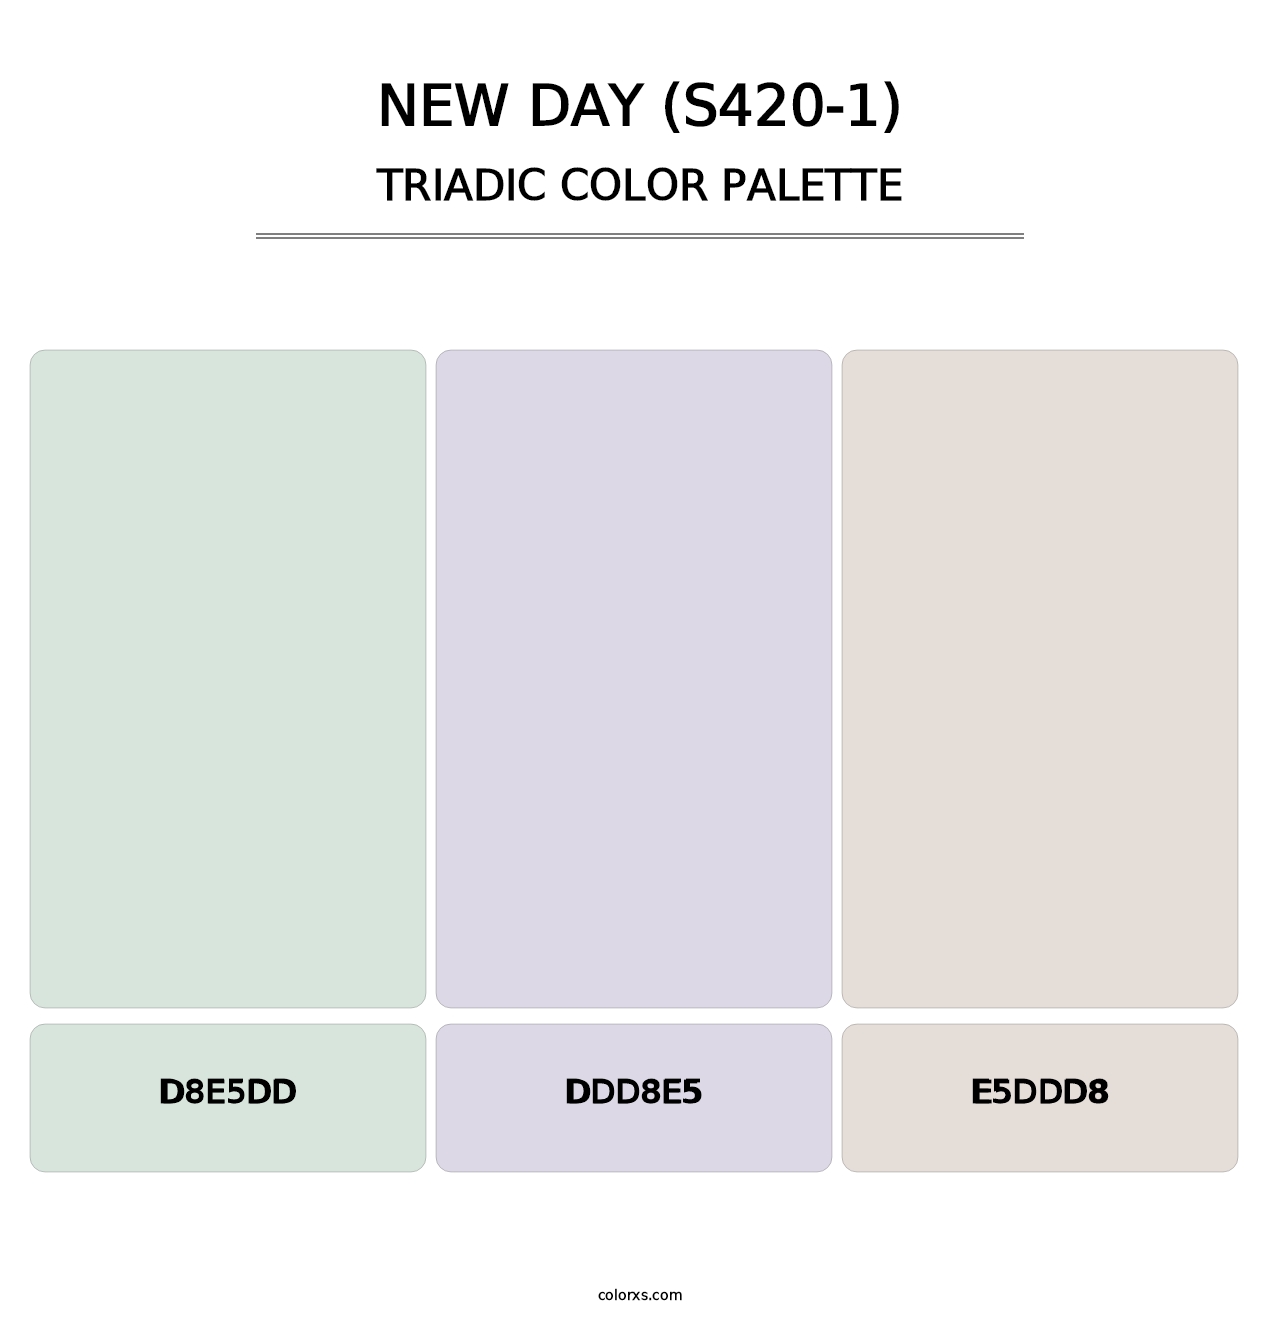 New Day (S420-1) - Triadic Color Palette